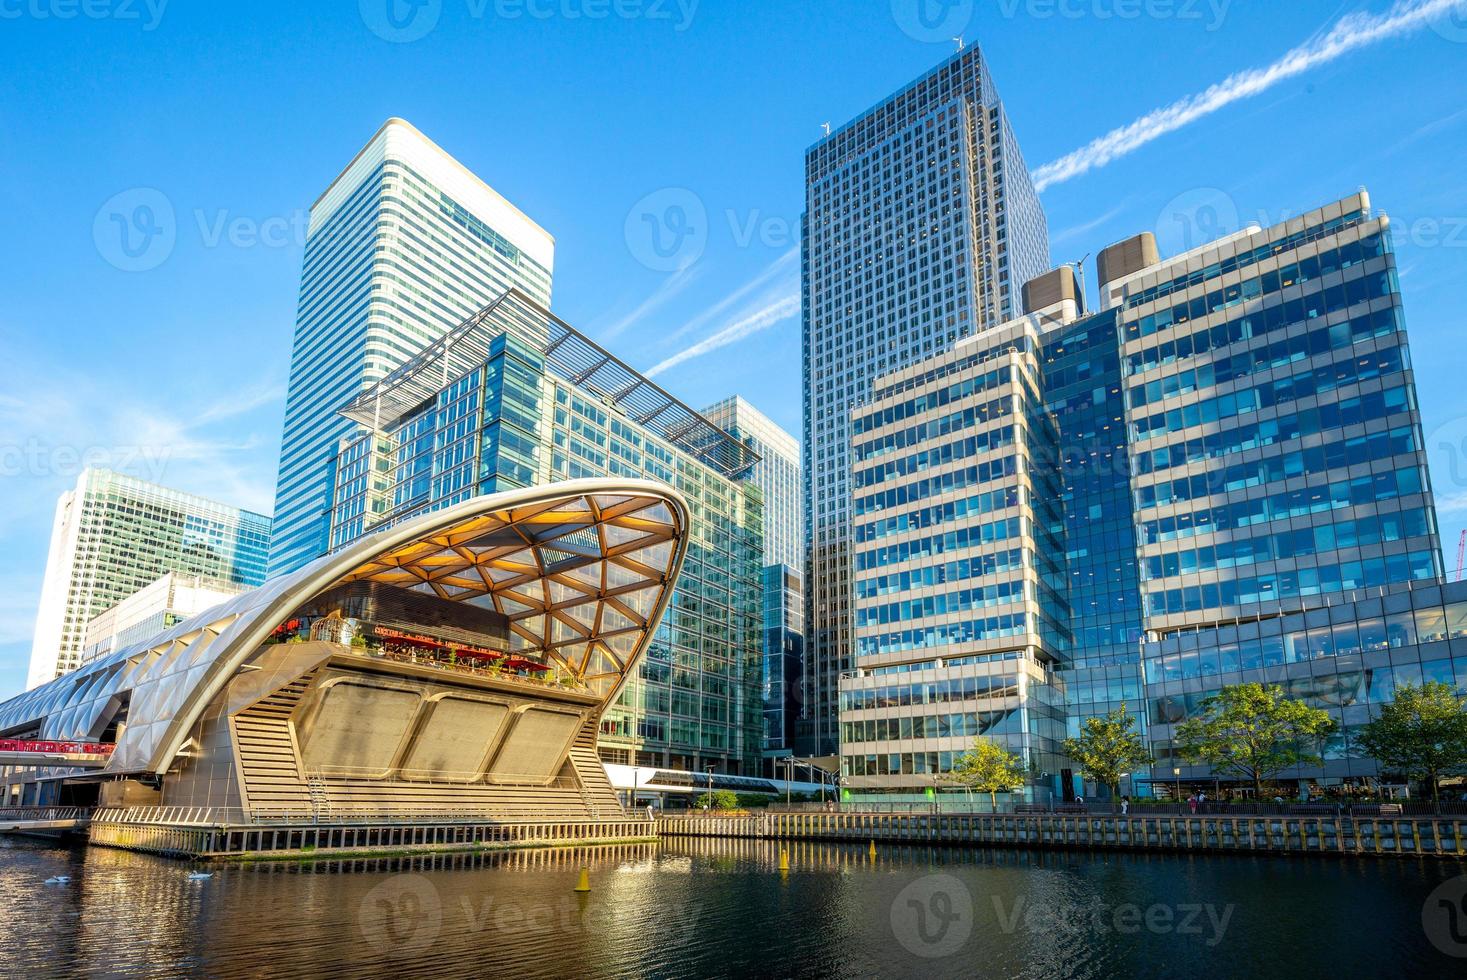 Canary Wharf on the Isle of Dogs in London, UK photo